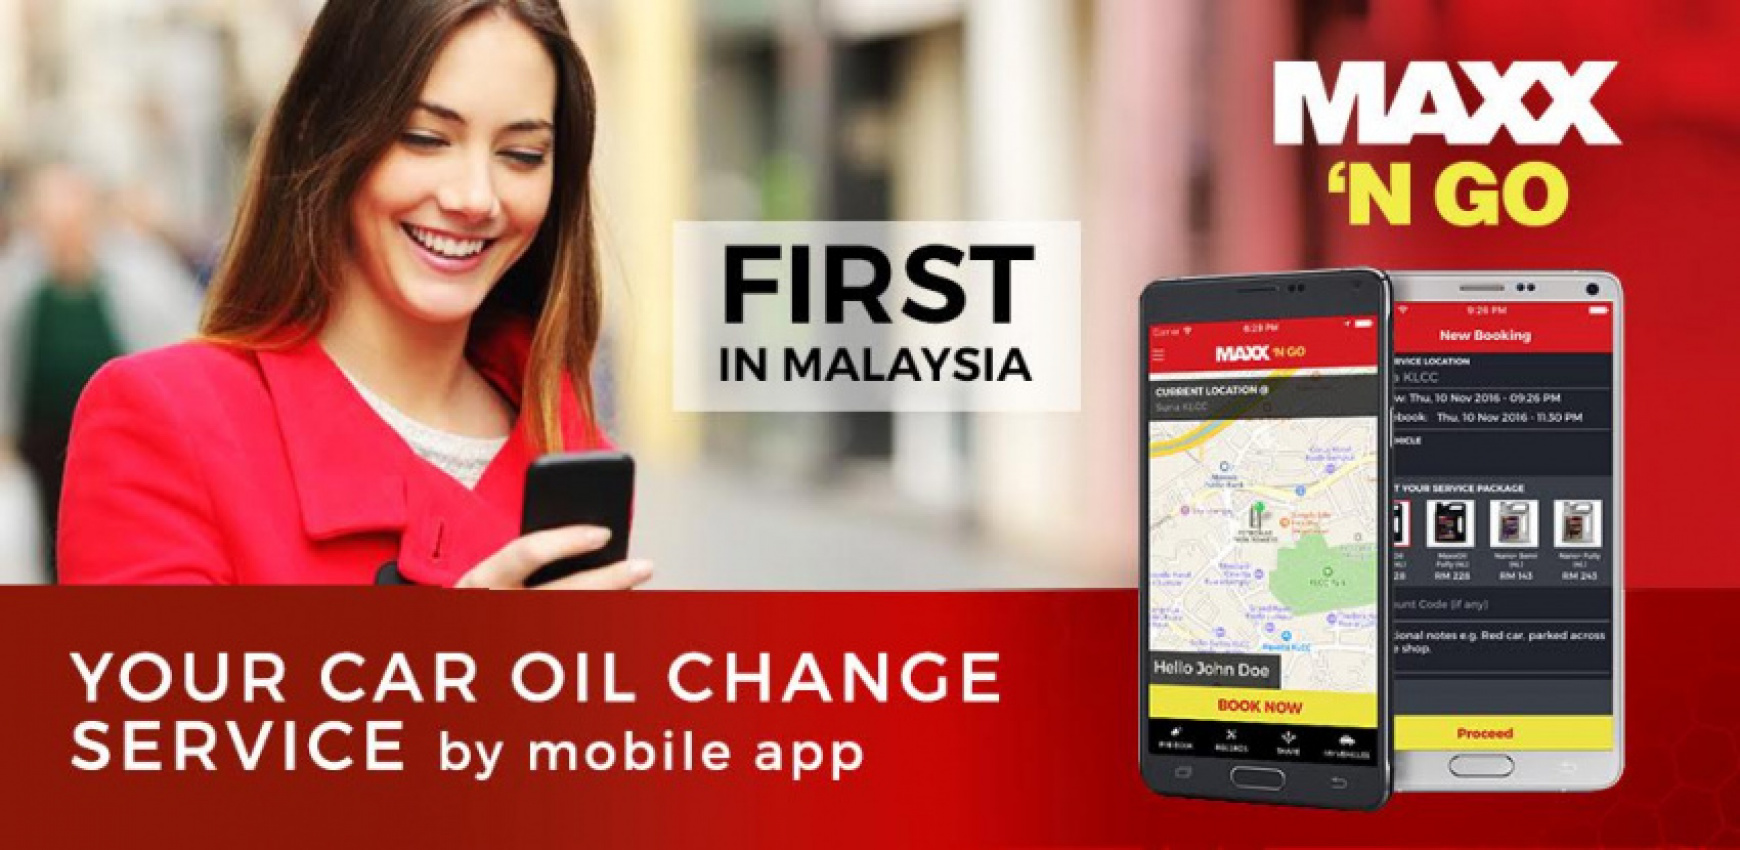 autos, cars, featured (news - right thumbnails), android, lubricant, maxxoil, android, maxxoil malaysia launches maxx ‘n go service app